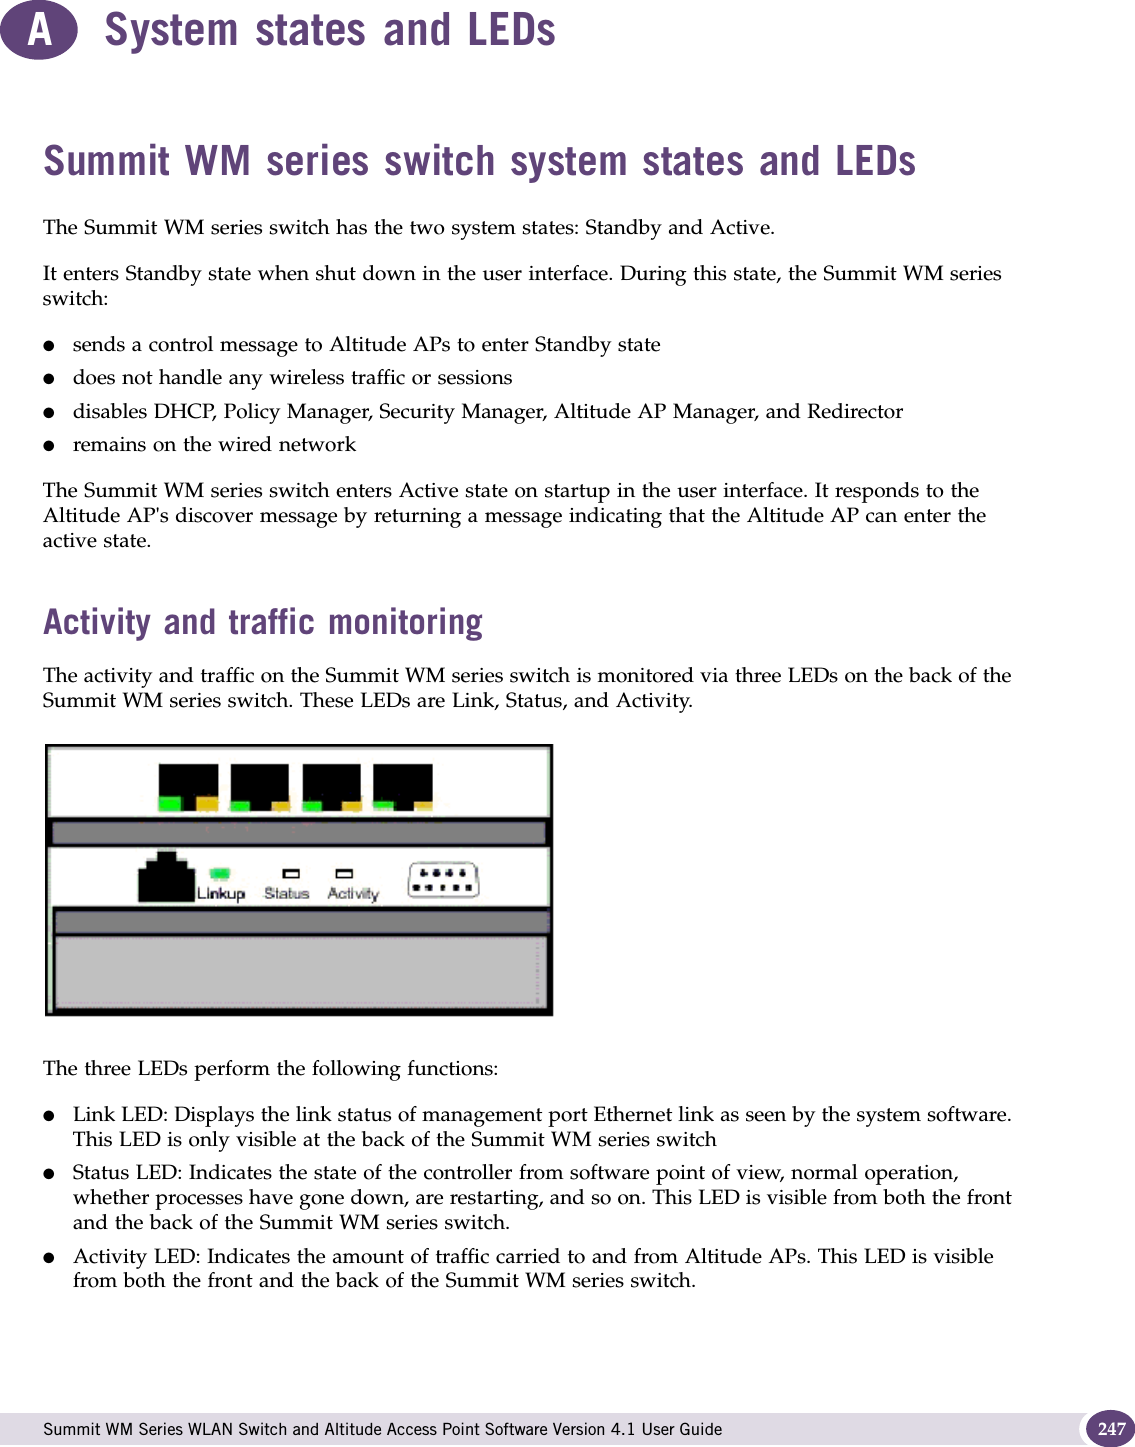  Summit WM Series WLAN Switch and Altitude Access Point Software Version 4.1 User Guide 247ASystem states and LEDsSummit WM series switch system states and LEDs The Summit WM series switch has the two system states: Standby and Active.It enters Standby state when shut down in the user interface. During this state, the Summit WM series switch:●sends a control message to Altitude APs to enter Standby state●does not handle any wireless traffic or sessions●disables DHCP, Policy Manager, Security Manager, Altitude AP Manager, and Redirector●remains on the wired networkThe Summit WM series switch enters Active state on startup in the user interface. It responds to the Altitude AP&apos;s discover message by returning a message indicating that the Altitude AP can enter the active state.Activity and traffic monitoringThe activity and traffic on the Summit WM series switch is monitored via three LEDs on the back of the Summit WM series switch. These LEDs are Link, Status, and Activity.The three LEDs perform the following functions:●Link LED: Displays the link status of management port Ethernet link as seen by the system software. This LED is only visible at the back of the Summit WM series switch●Status LED: Indicates the state of the controller from software point of view, normal operation, whether processes have gone down, are restarting, and so on. This LED is visible from both the front and the back of the Summit WM series switch. ●Activity LED: Indicates the amount of traffic carried to and from Altitude APs. This LED is visible from both the front and the back of the Summit WM series switch. 